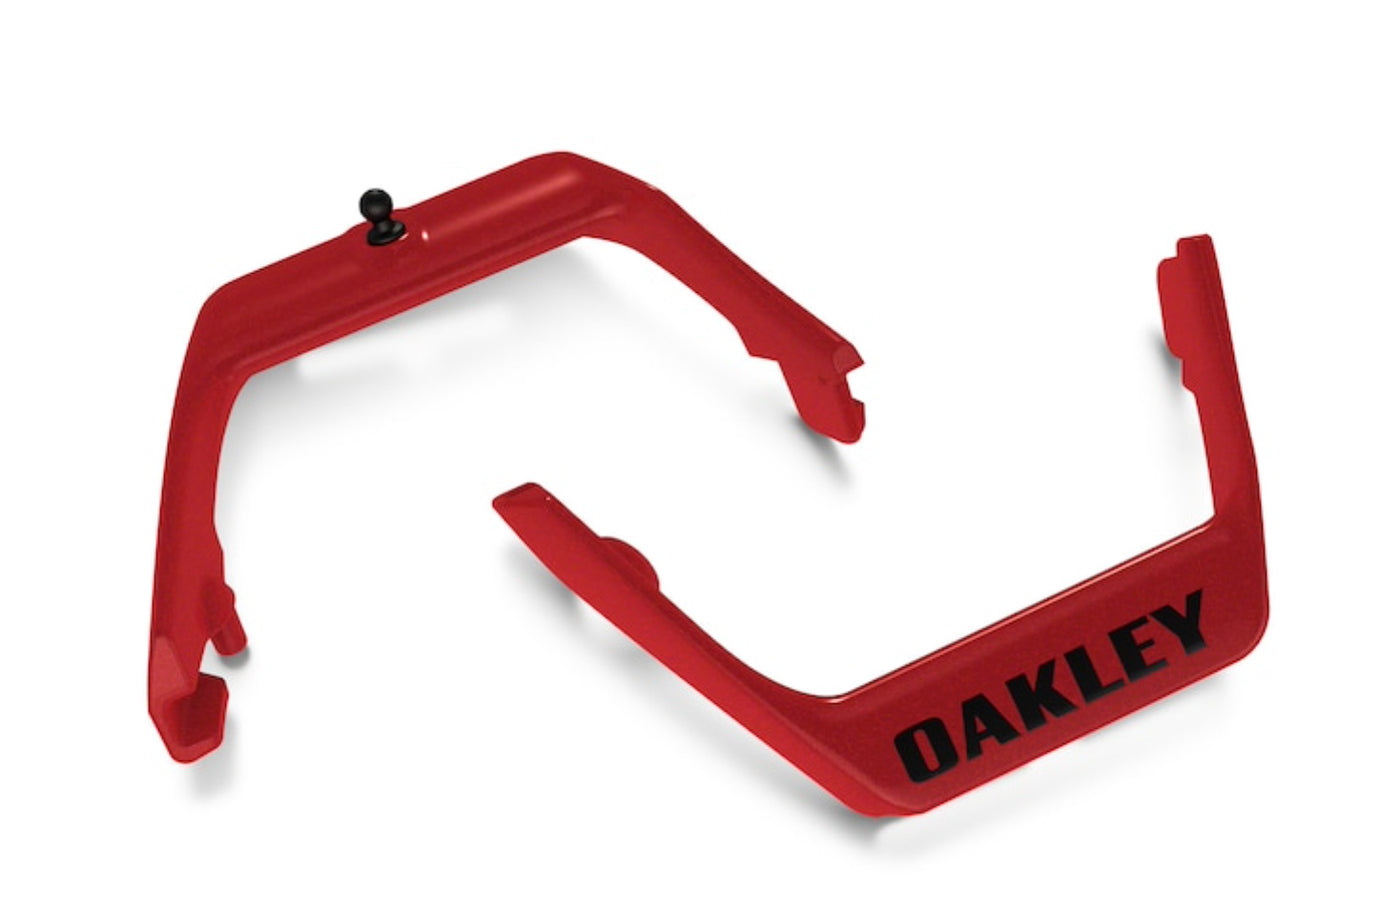 OAKLEY - AIRBRAKE MX REPLACEMENT OUTRIGGER KIT